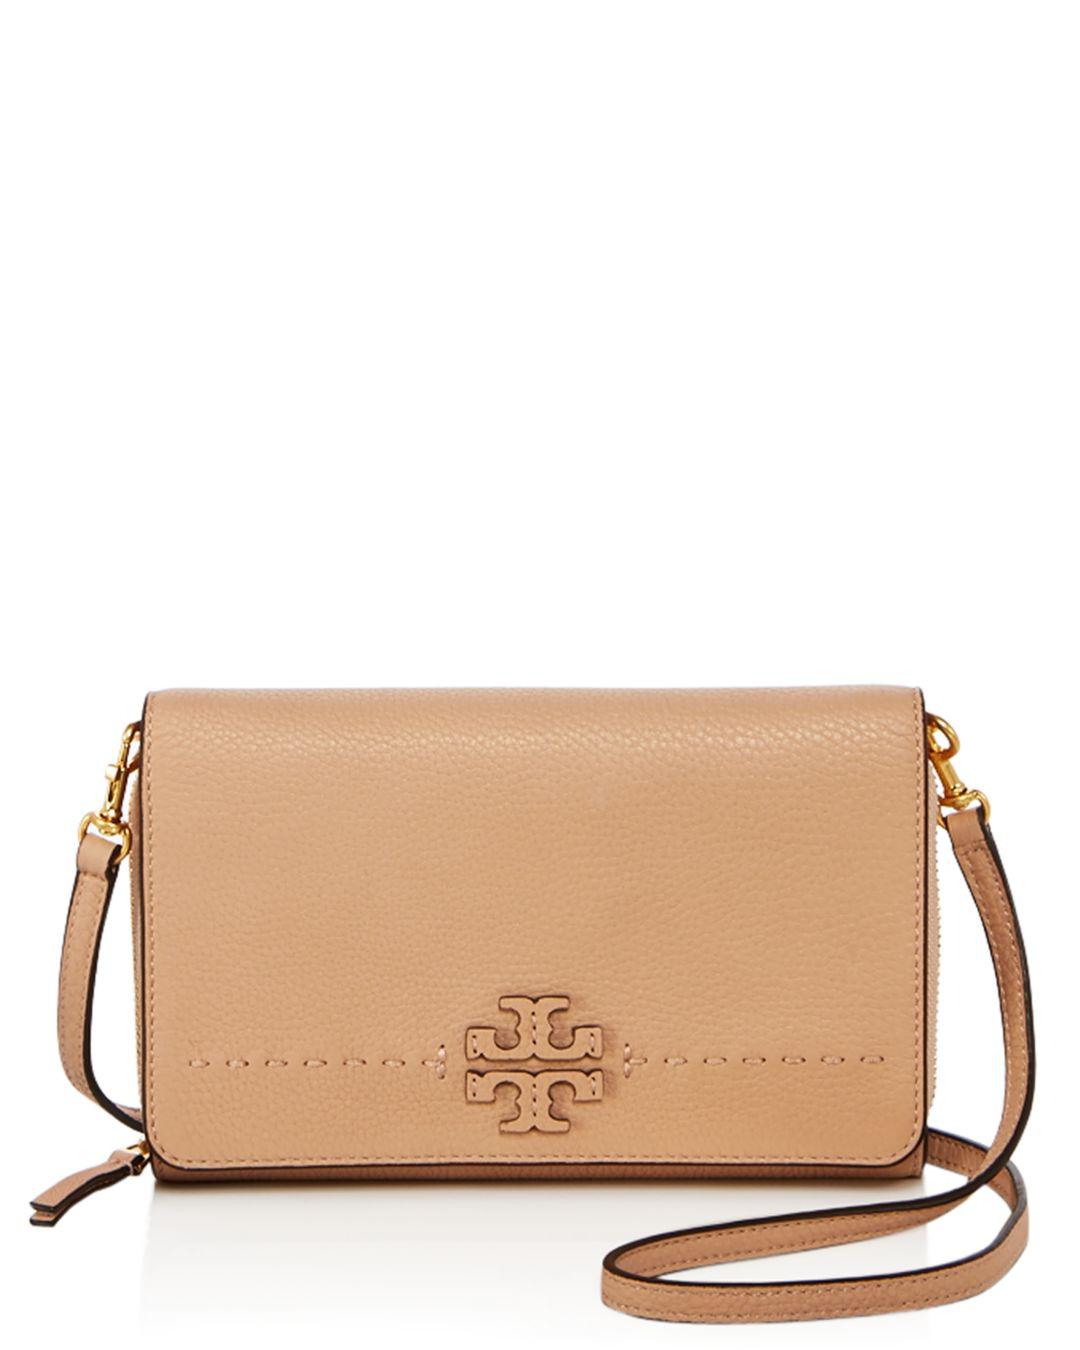 Tory Burch Mcgraw Flat Leather Wallet Crossbody in Natural - Lyst